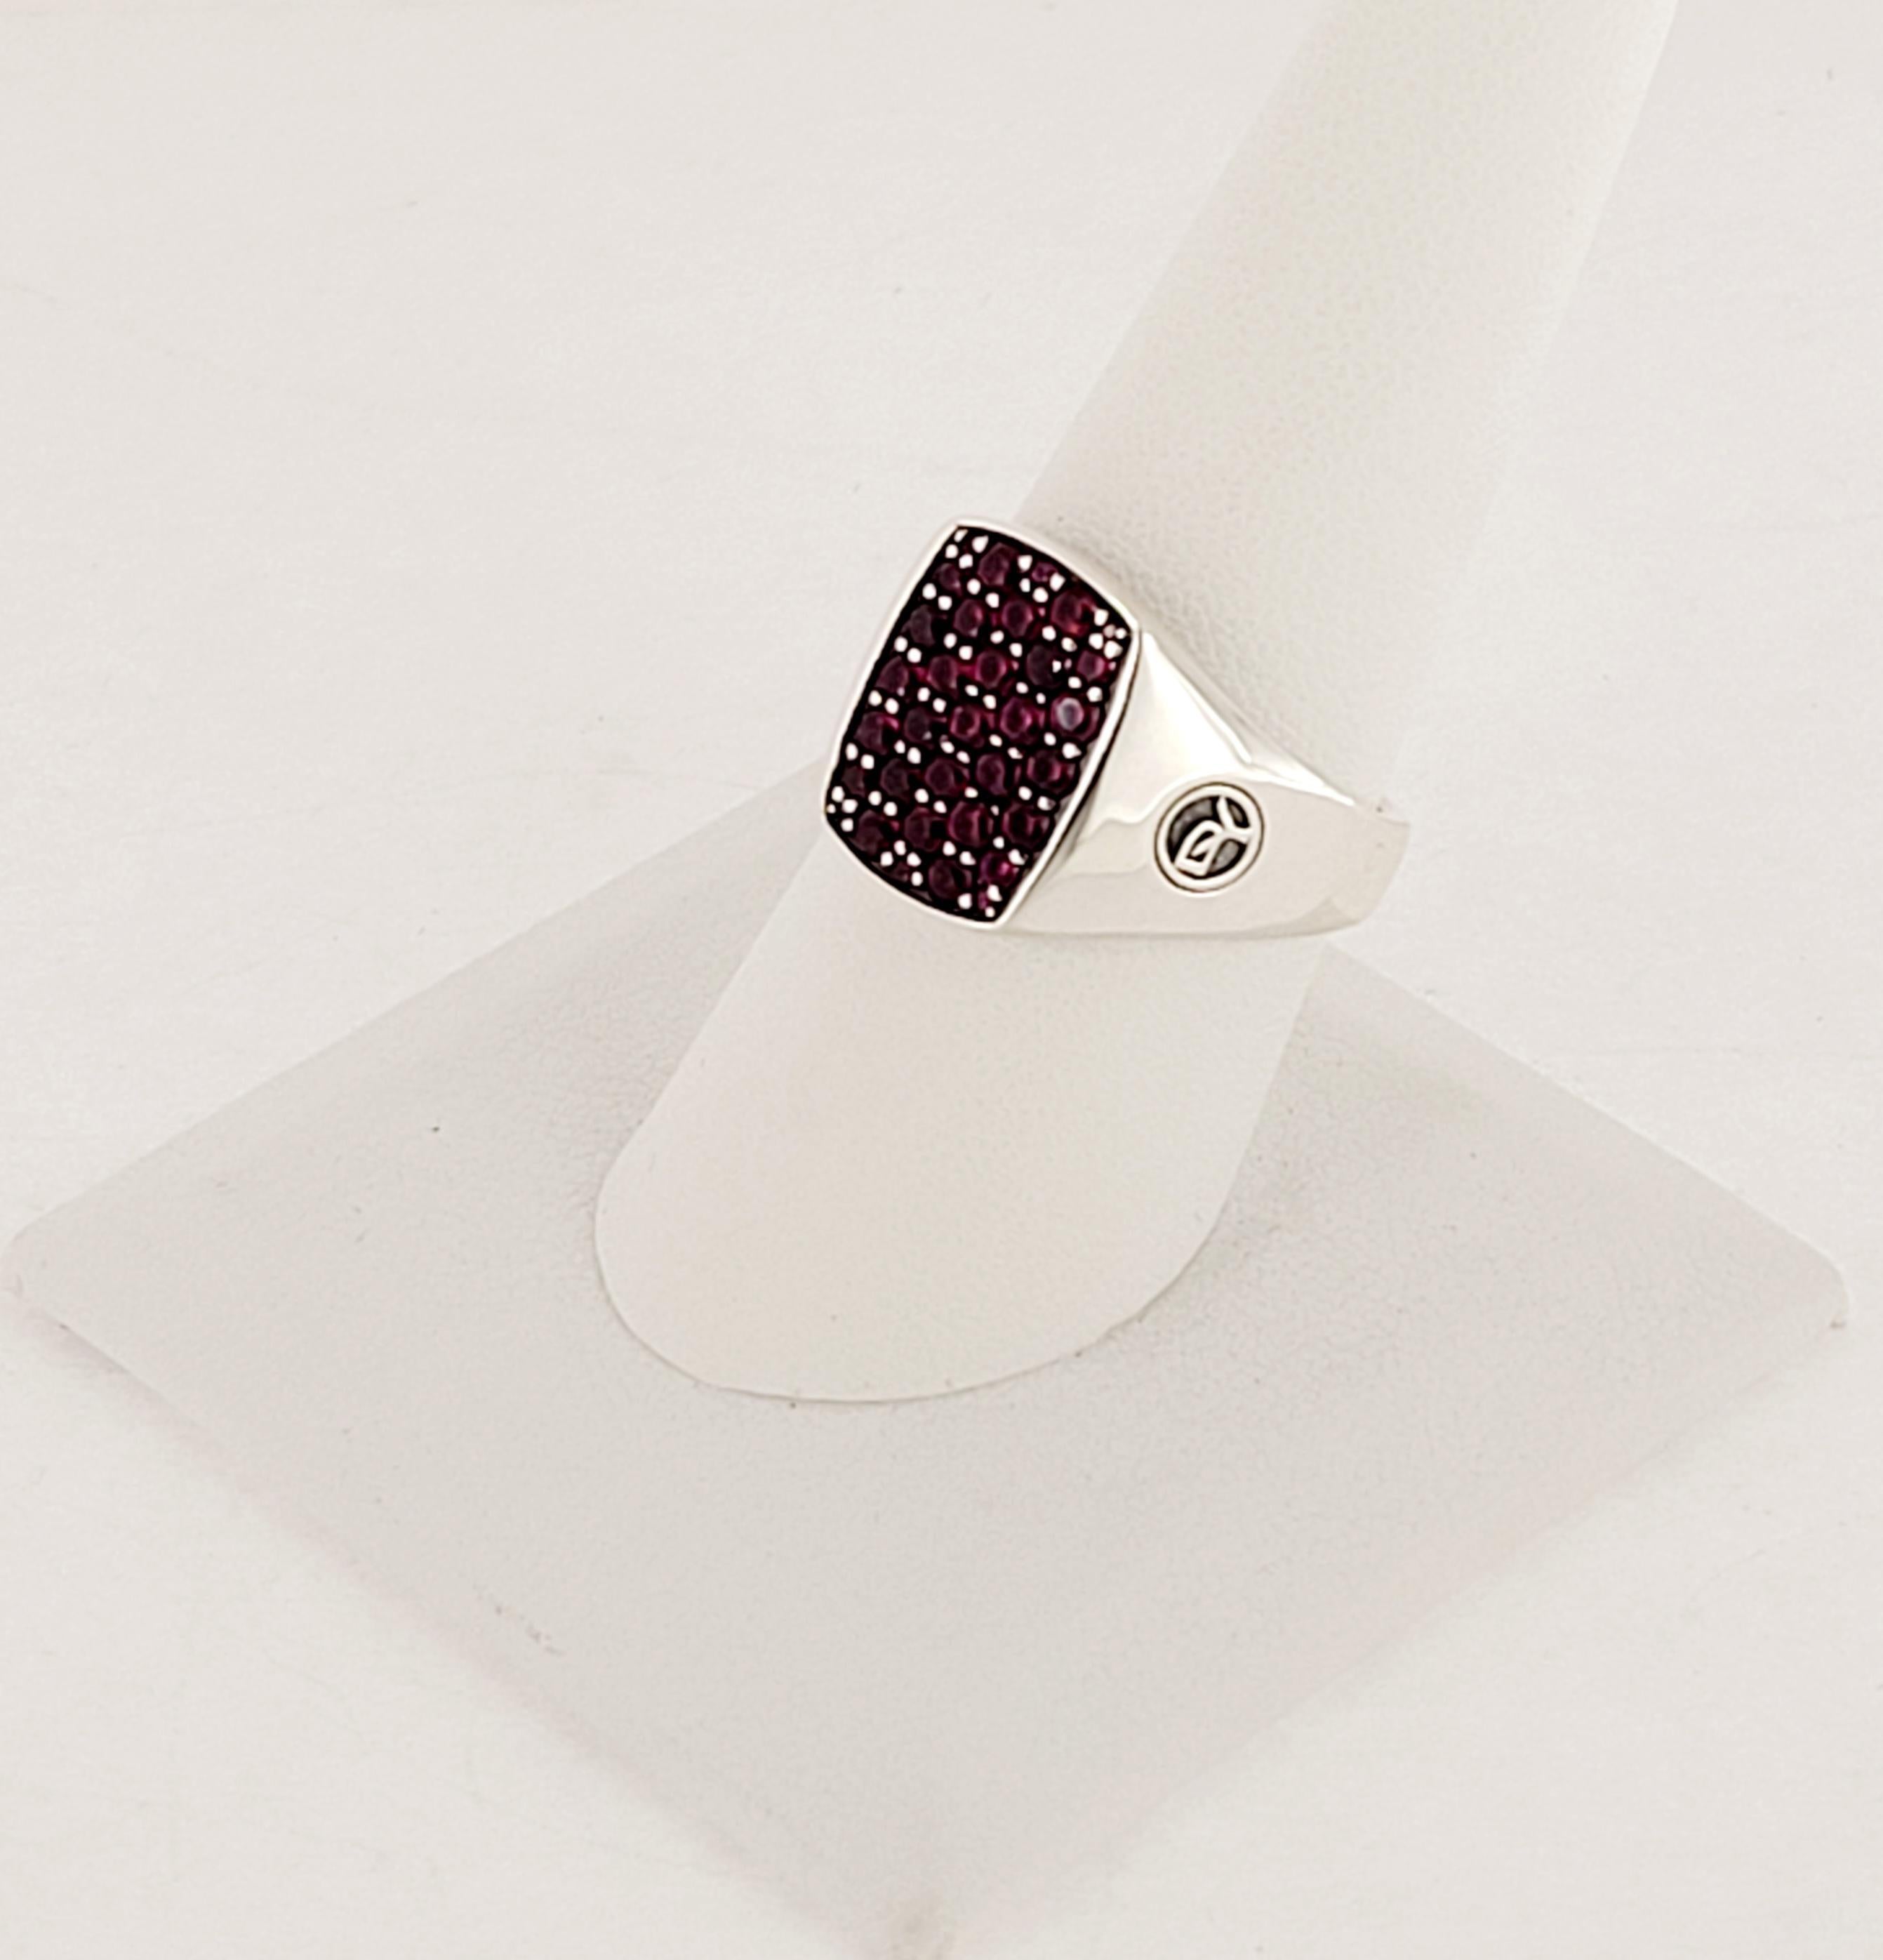 Brand David Yurman 
Brand new, never worn
Gender Men
Type Ring 
925 Sterling Silver
Ring Size 9
Main stone Sapphires
Stone Color Pink 
Weight 9.6gr
Comes with David Yurman pouch